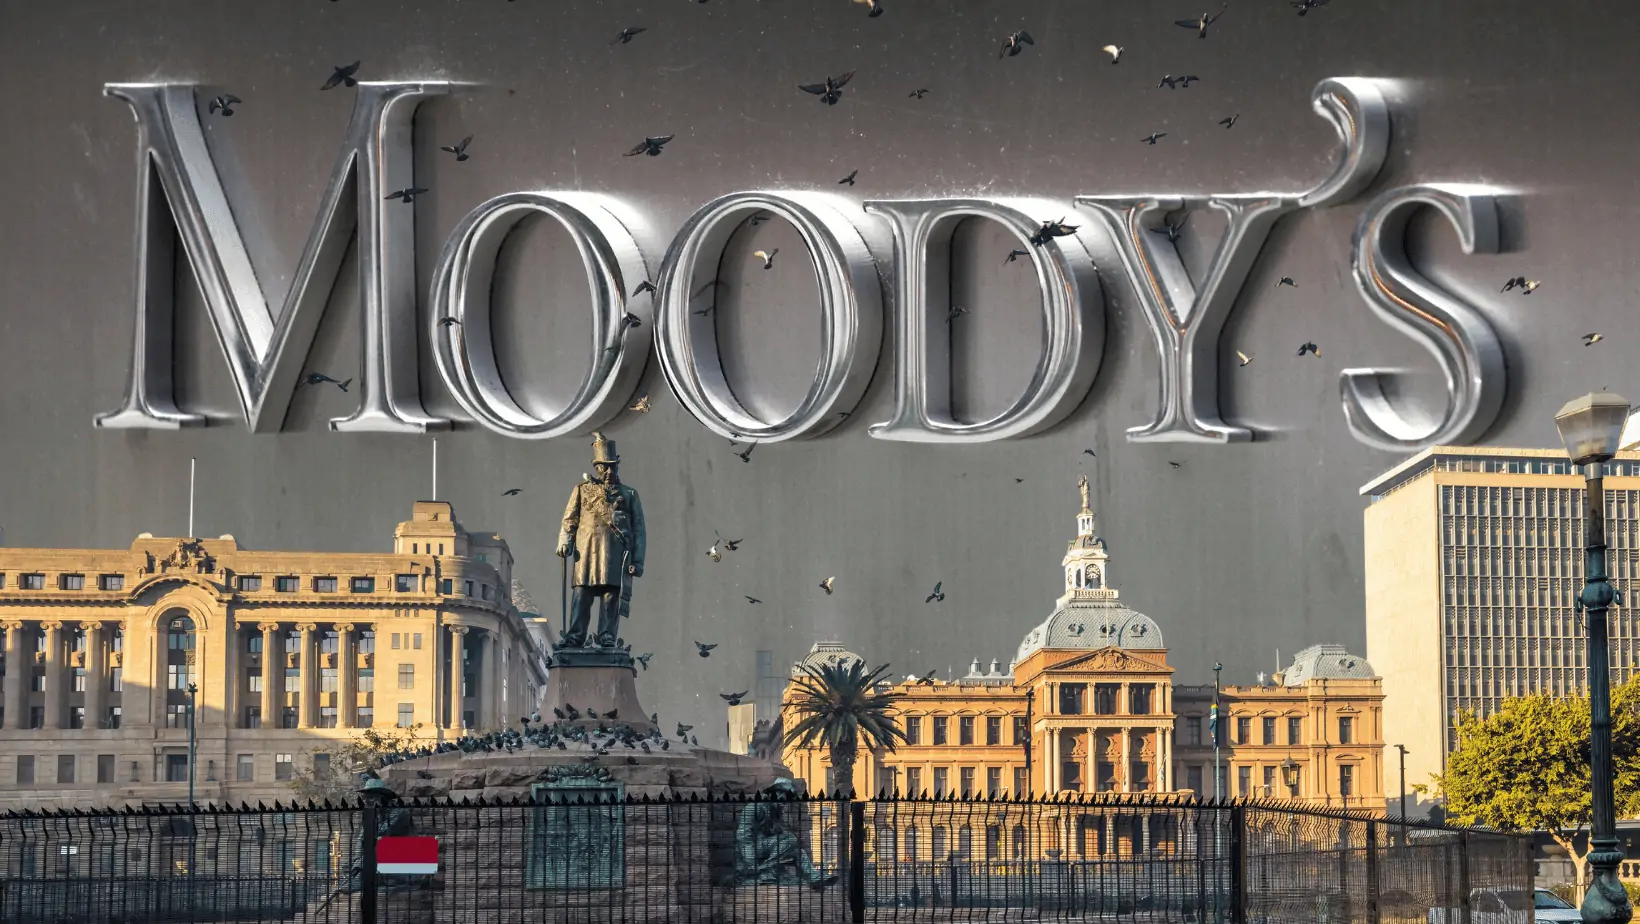 Moody’s Places City of Tshwane’s Ratings Under Review: What Investors Need to Know